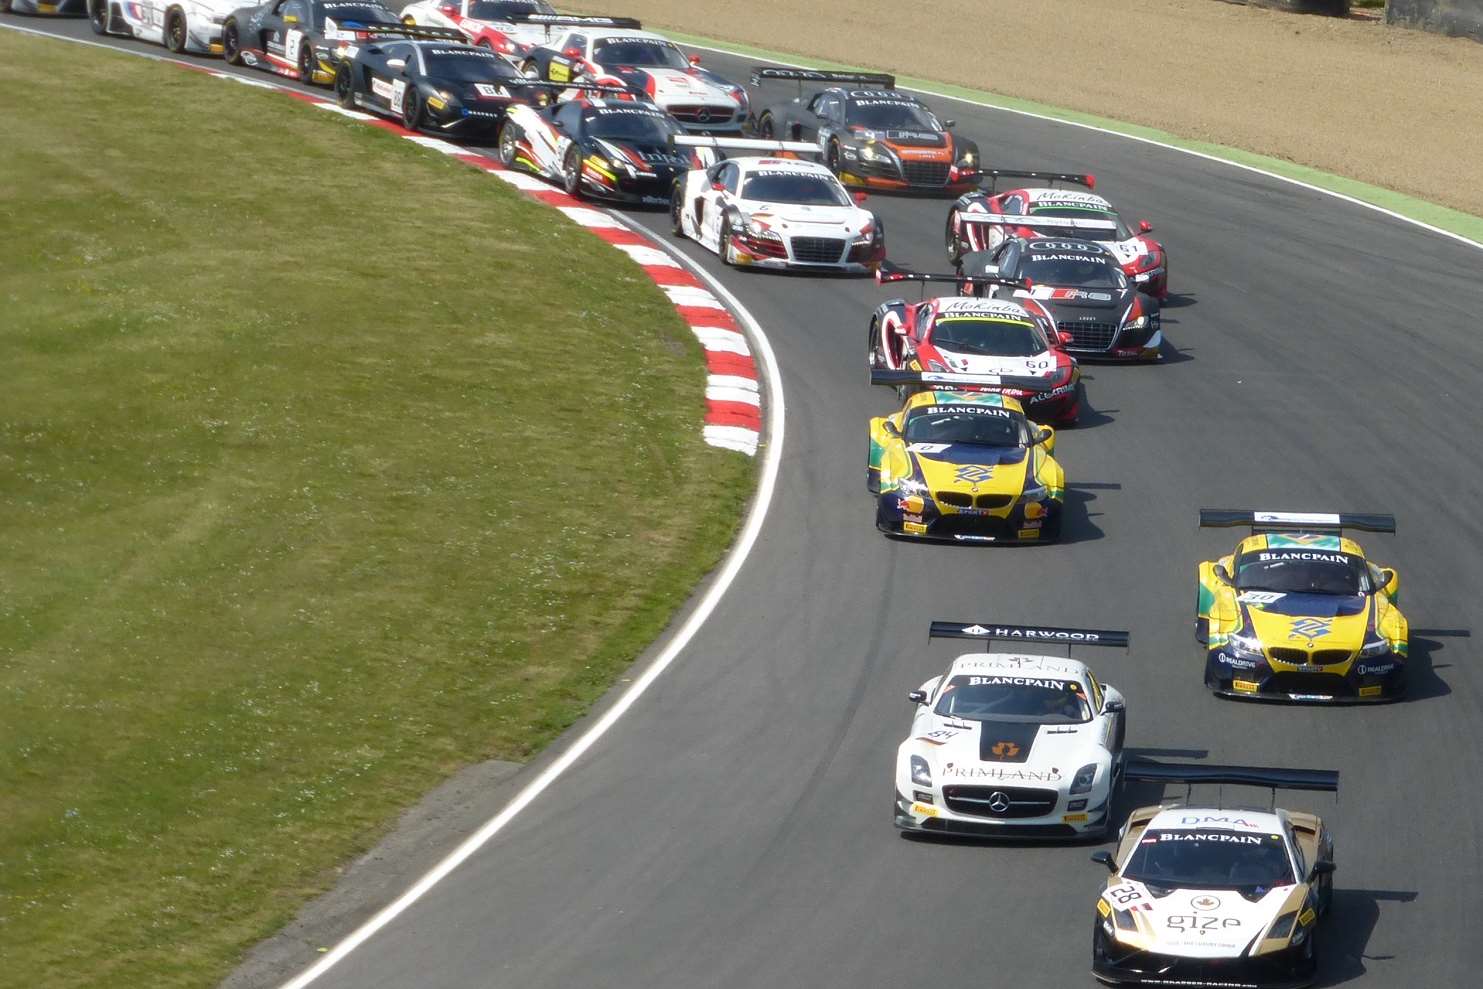 The field piles into Paddock Hill Bend at the start of the feature race. Picture - Joe Wright